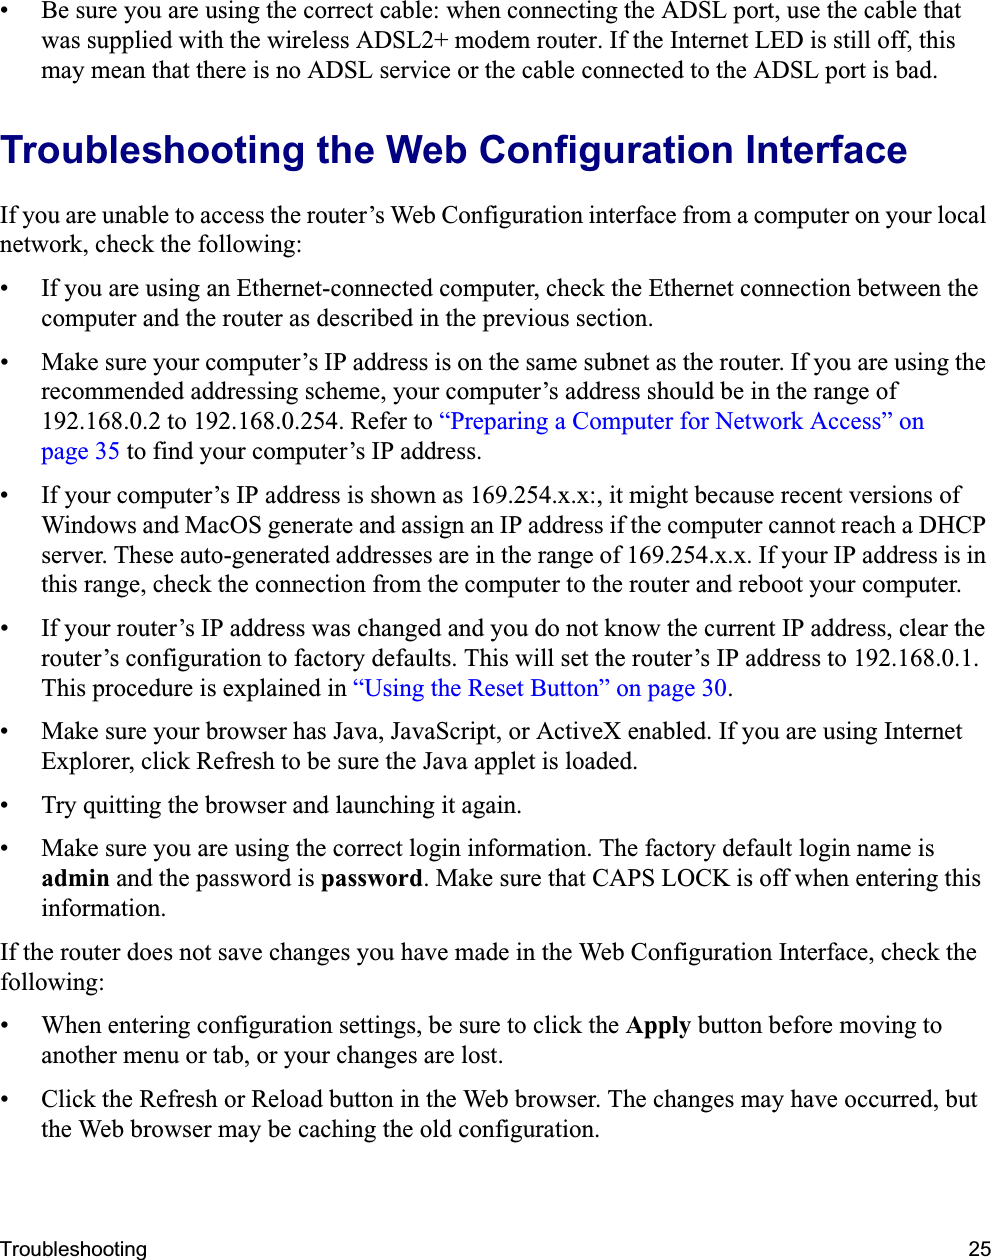 Troubleshooting 25• Be sure you are using the correct cable: when connecting the ADSL port, use the cable that was supplied with the wireless ADSL2+ modem router. If the Internet LED is still off, this may mean that there is no ADSL service or the cable connected to the ADSL port is bad.Troubleshooting the Web Configuration InterfaceIf you are unable to access the router’s Web Configuration interface from a computer on your local network, check the following:• If you are using an Ethernet-connected computer, check the Ethernet connection between the computer and the router as described in the previous section.• Make sure your computer’s IP address is on the same subnet as the router. If you are using the recommended addressing scheme, your computer’s address should be in the range of 192.168.0.2 to 192.168.0.254. Refer to “Preparing a Computer for Network Access” on page 35 to find your computer’s IP address. • If your computer’s IP address is shown as 169.254.x.x:, it might because recent versions of Windows and MacOS generate and assign an IP address if the computer cannot reach a DHCP server. These auto-generated addresses are in the range of 169.254.x.x. If your IP address is in this range, check the connection from the computer to the router and reboot your computer.• If your router’s IP address was changed and you do not know the current IP address, clear the router’s configuration to factory defaults. This will set the router’s IP address to 192.168.0.1. This procedure is explained in “Using the Reset Button” on page 30.• Make sure your browser has Java, JavaScript, or ActiveX enabled. If you are using Internet Explorer, click Refresh to be sure the Java applet is loaded.• Try quitting the browser and launching it again.• Make sure you are using the correct login information. The factory default login name is admin and the password is password. Make sure that CAPS LOCK is off when entering this information.If the router does not save changes you have made in the Web Configuration Interface, check the following:• When entering configuration settings, be sure to click the Apply button before moving to another menu or tab, or your changes are lost. • Click the Refresh or Reload button in the Web browser. The changes may have occurred, but the Web browser may be caching the old configuration.